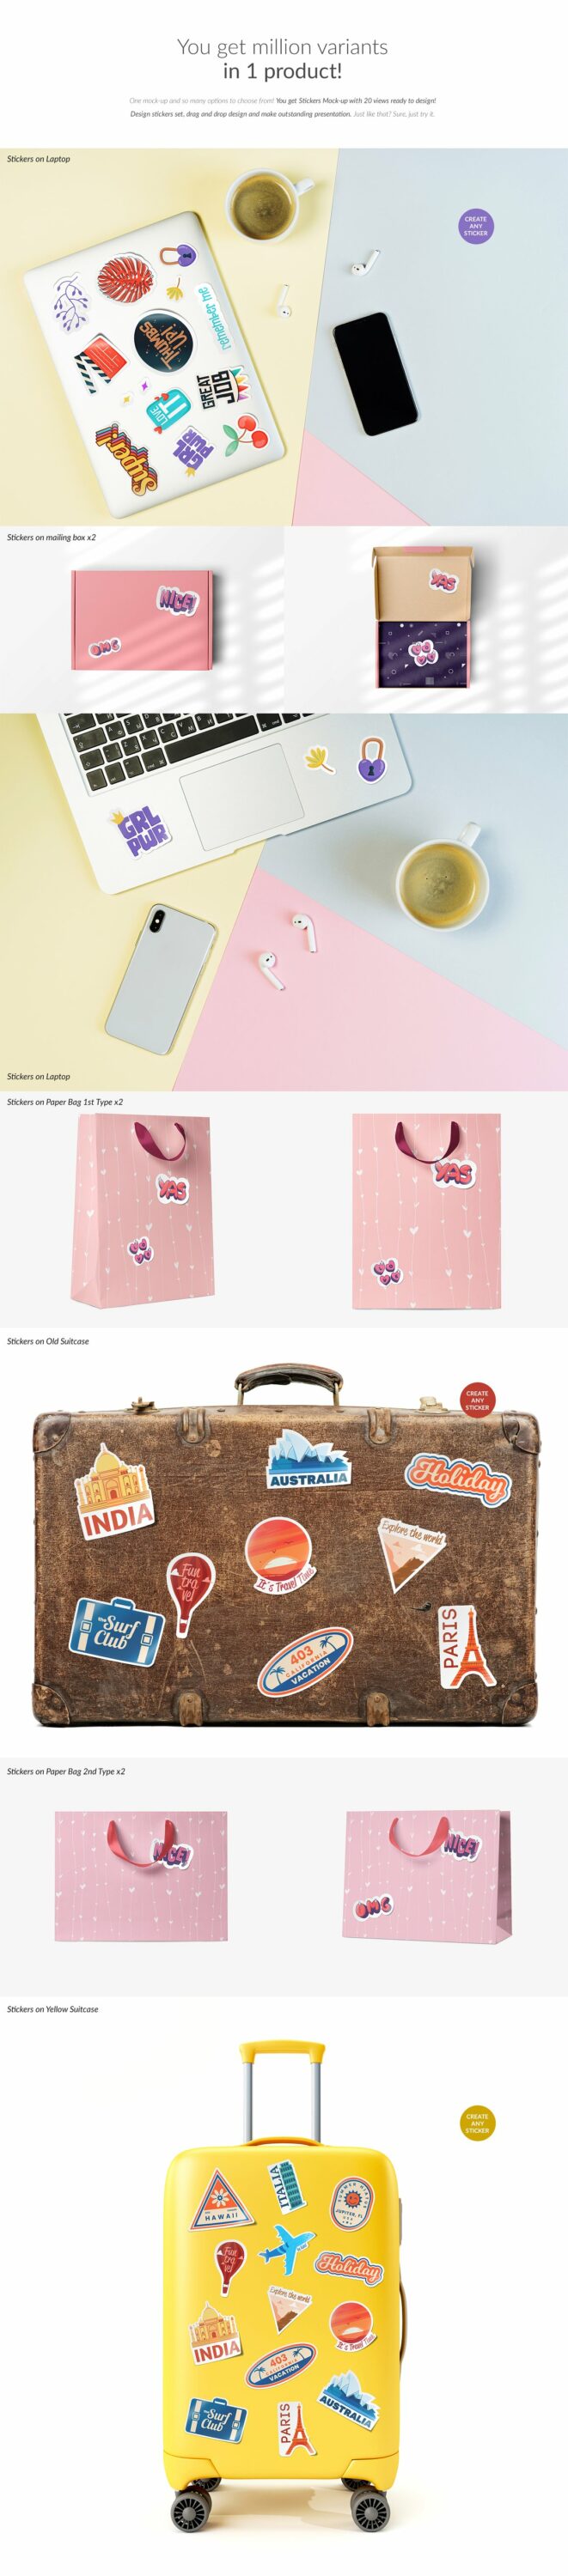 A selection of images with beautiful stickers on laptops and bags.